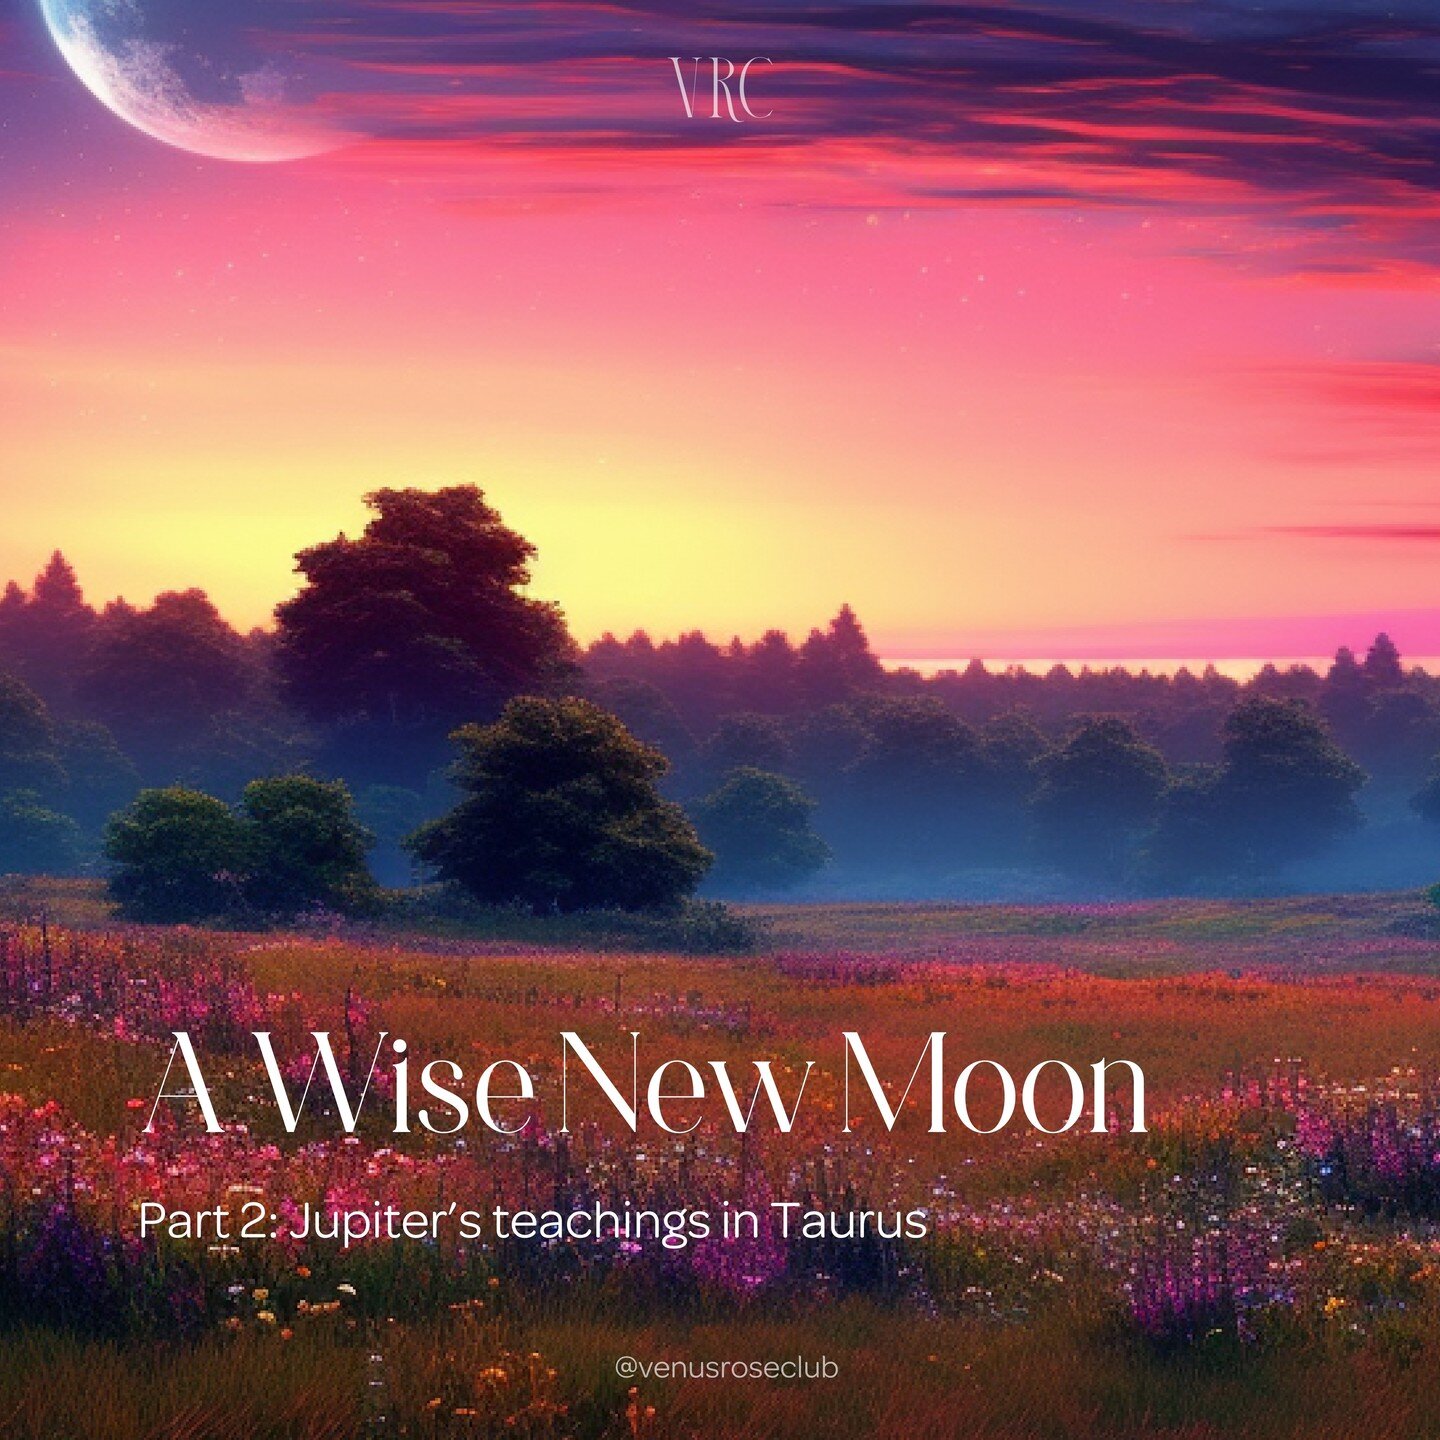 🌑 A Wise New Moon - Part 2

Another long one - this 3-part series is being woven into a New Moon pack for VRCs members, so it's pretty hefty.

This time we're hanging our with hierophant and high-viber Jupiter.

💫 My hope is that you'll read or rec